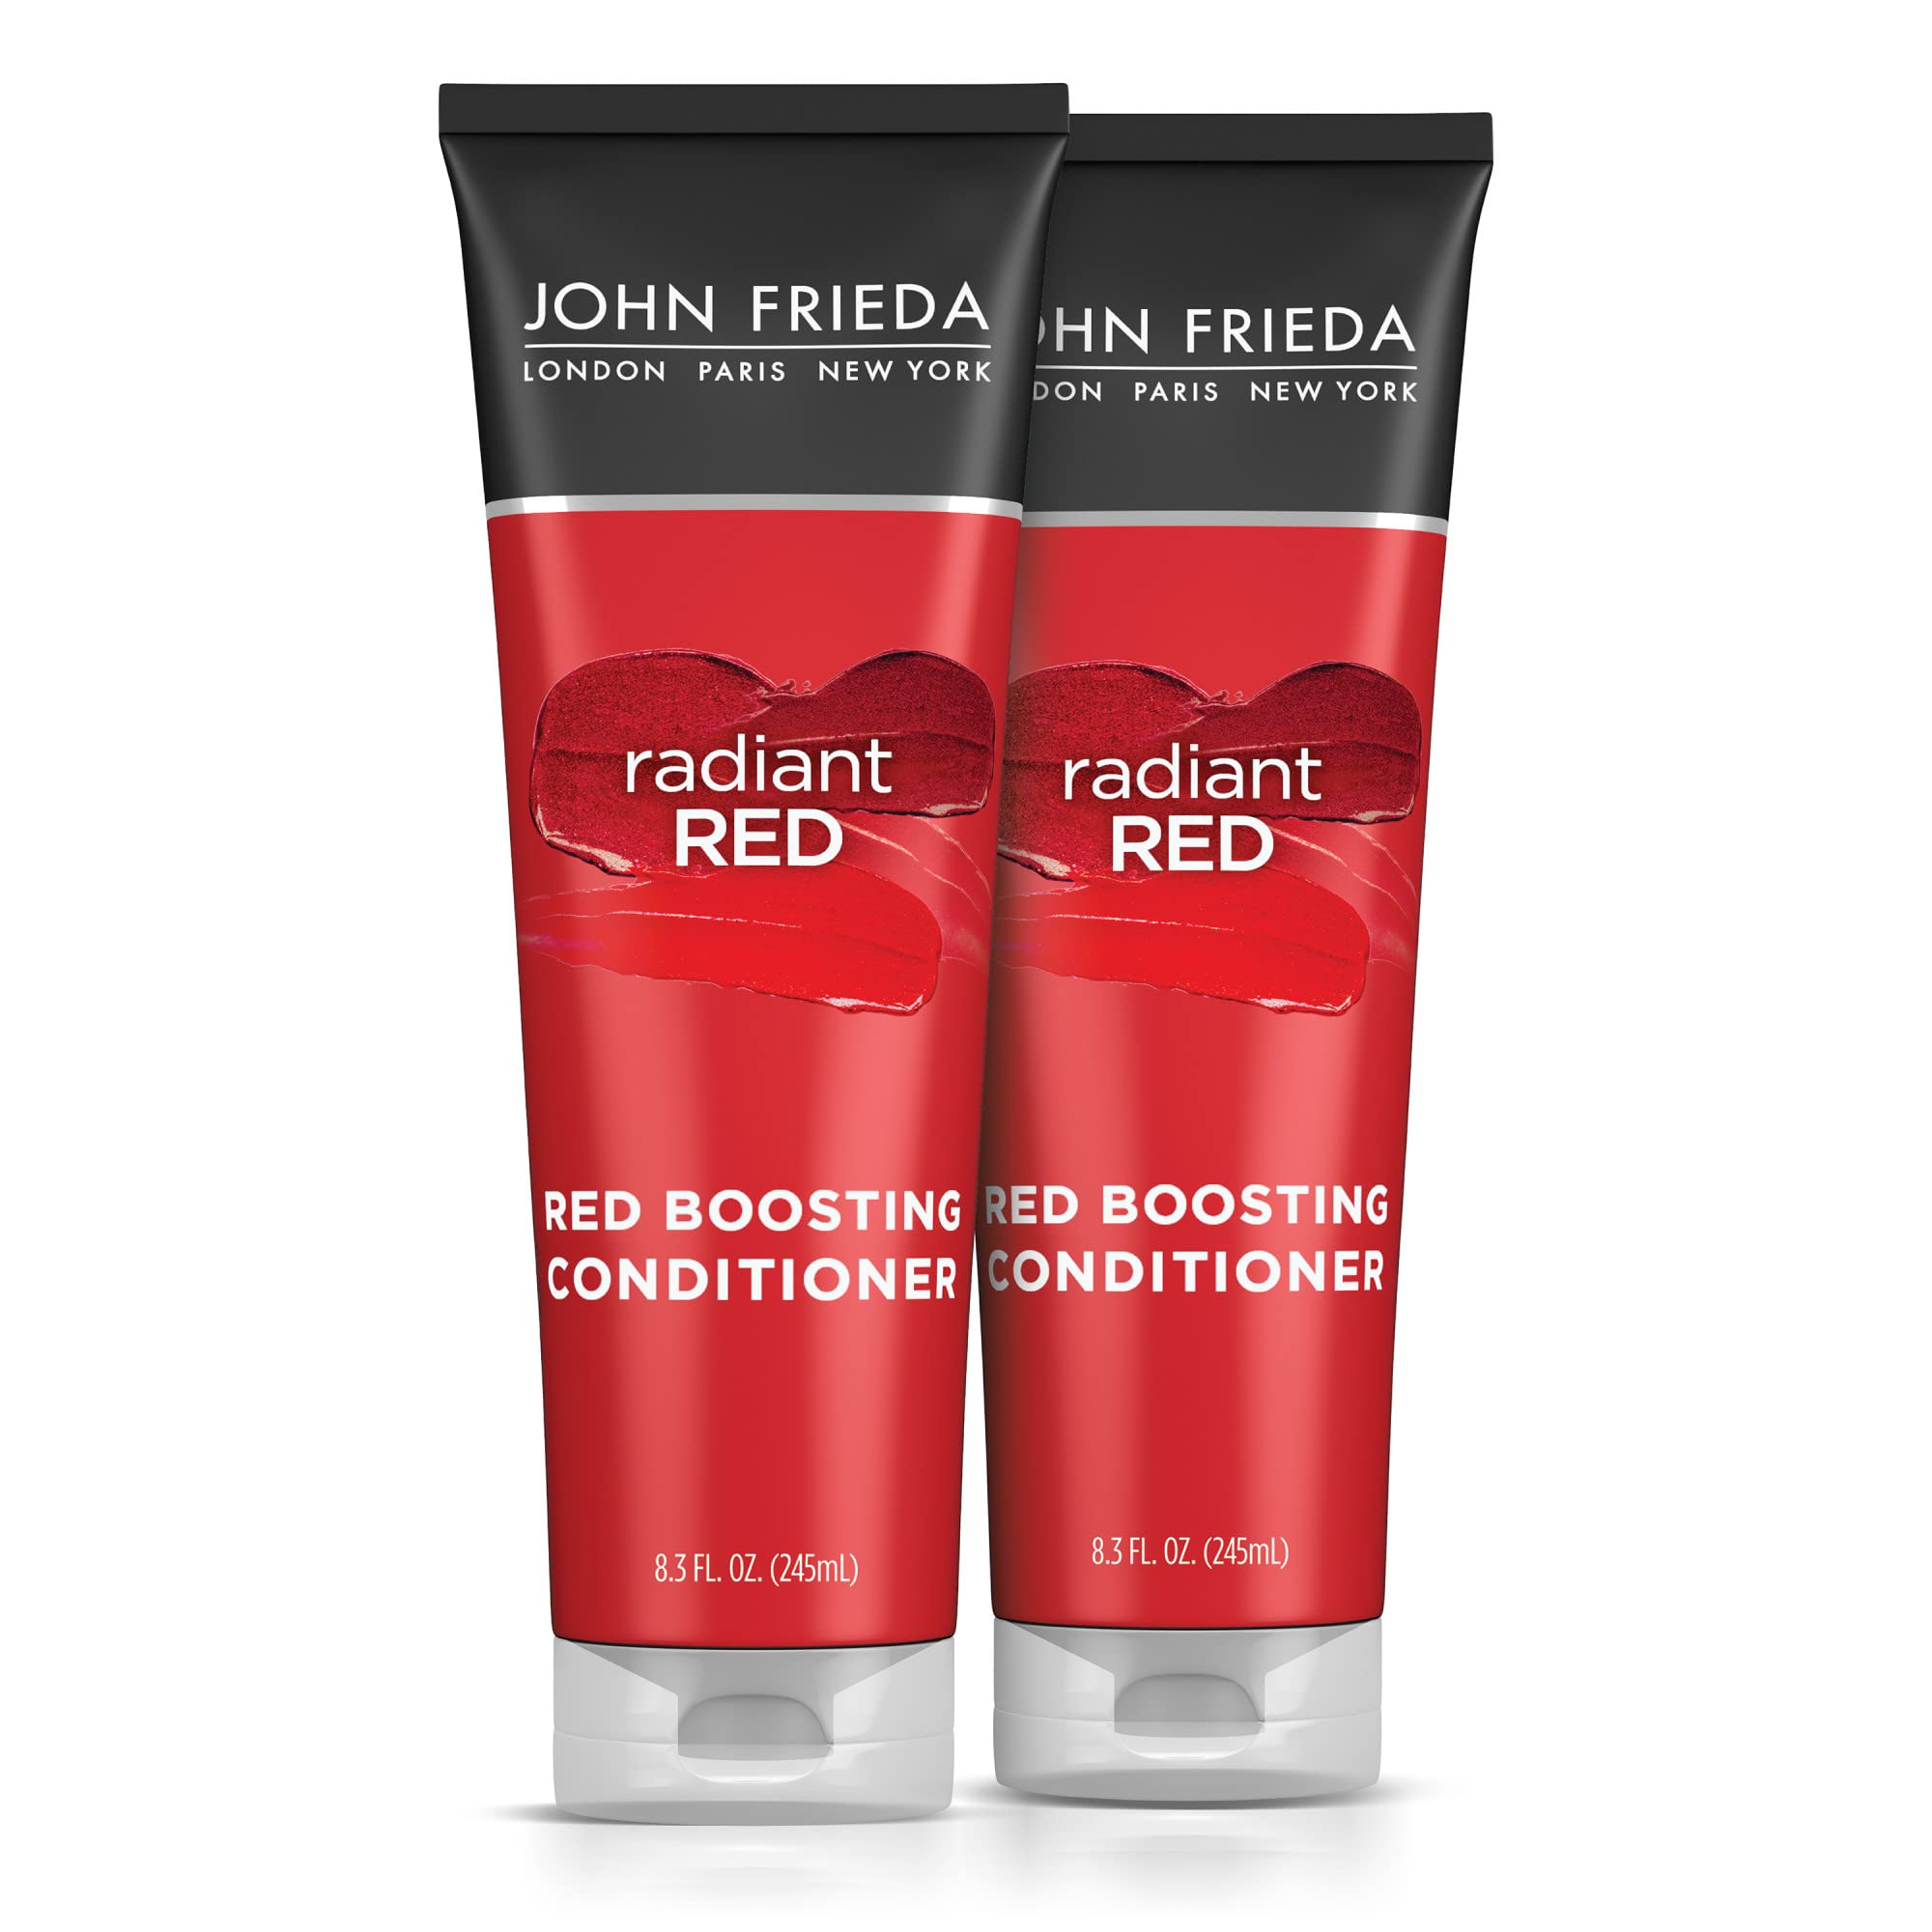 John Frieda Radiant Red Red Hair Conditioner, Daily Deep Conditioner, with Pomegranate and Vitamin E, Helps Replenish Red Hair Tones, 8.3 Ounce (2 Pack)